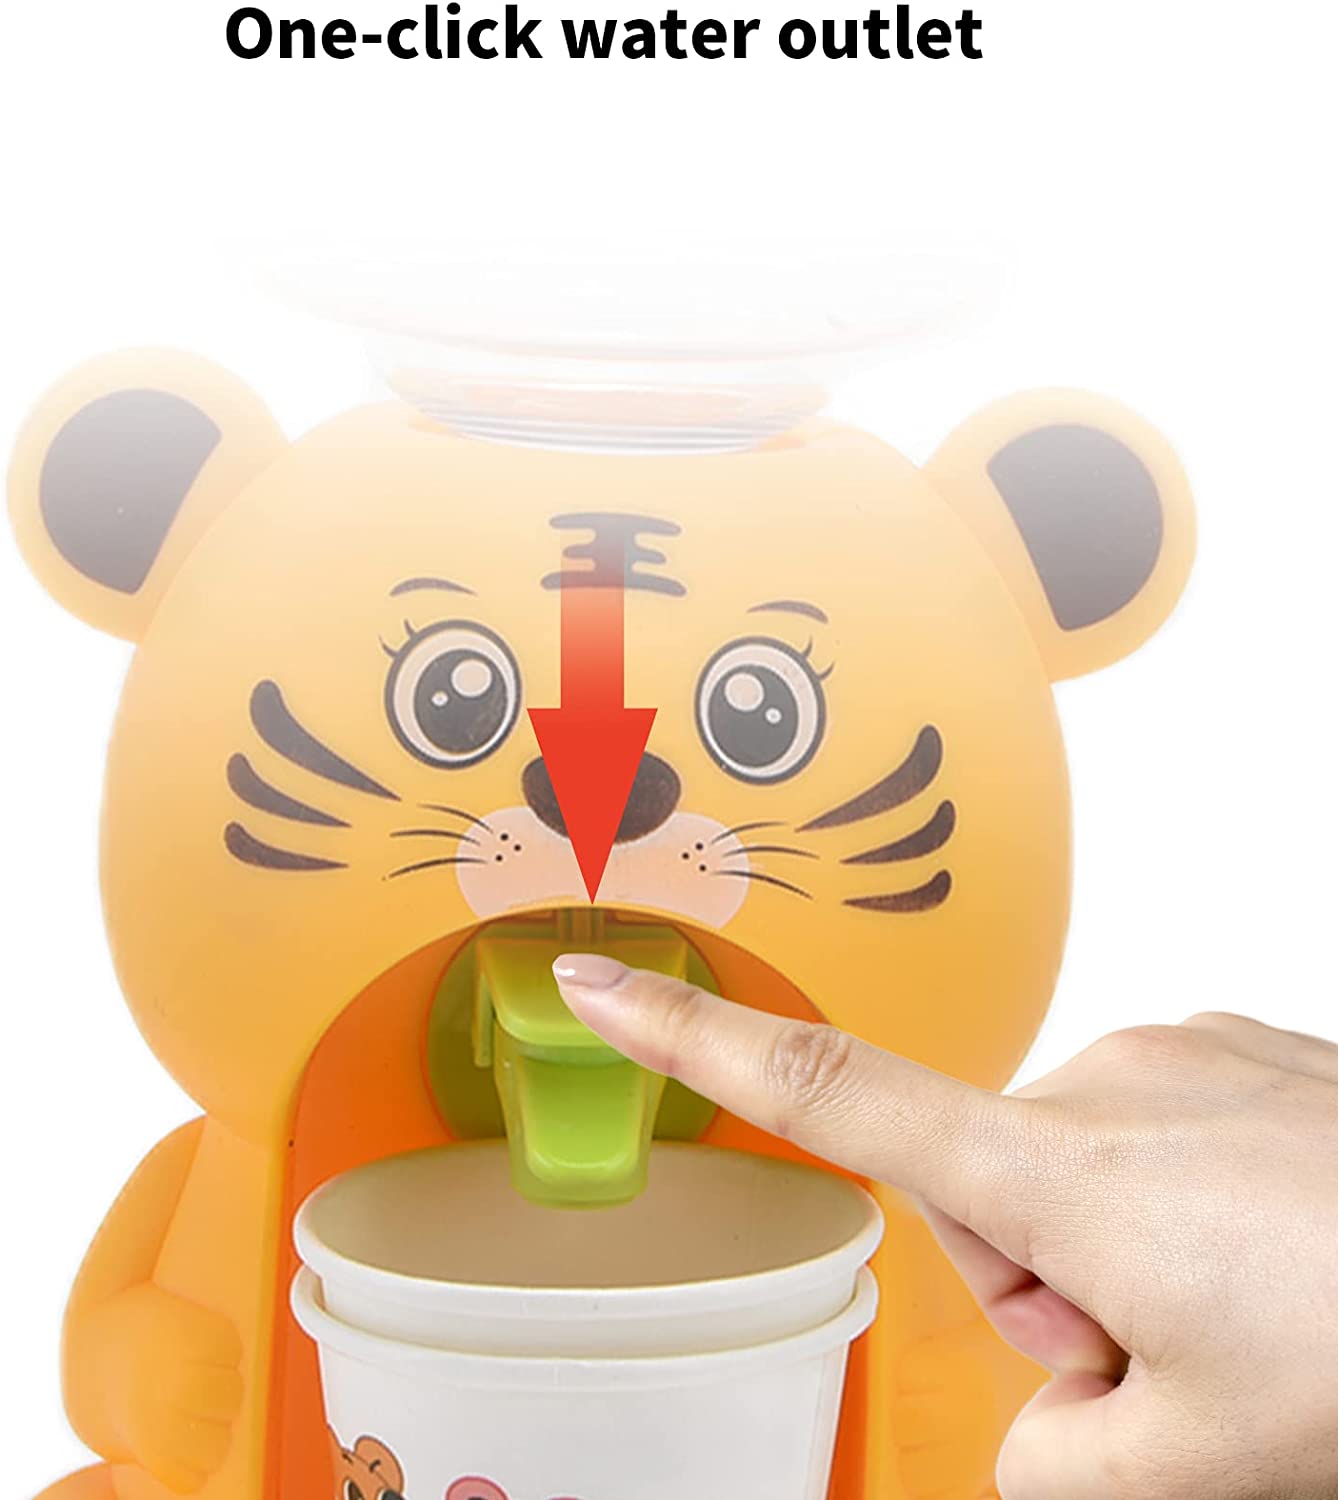 Mini Water Dispenser Cartoon Tiger Water Dispenser For Kids Pretend Play Toys Drinking Water Fountains For Kids Gift